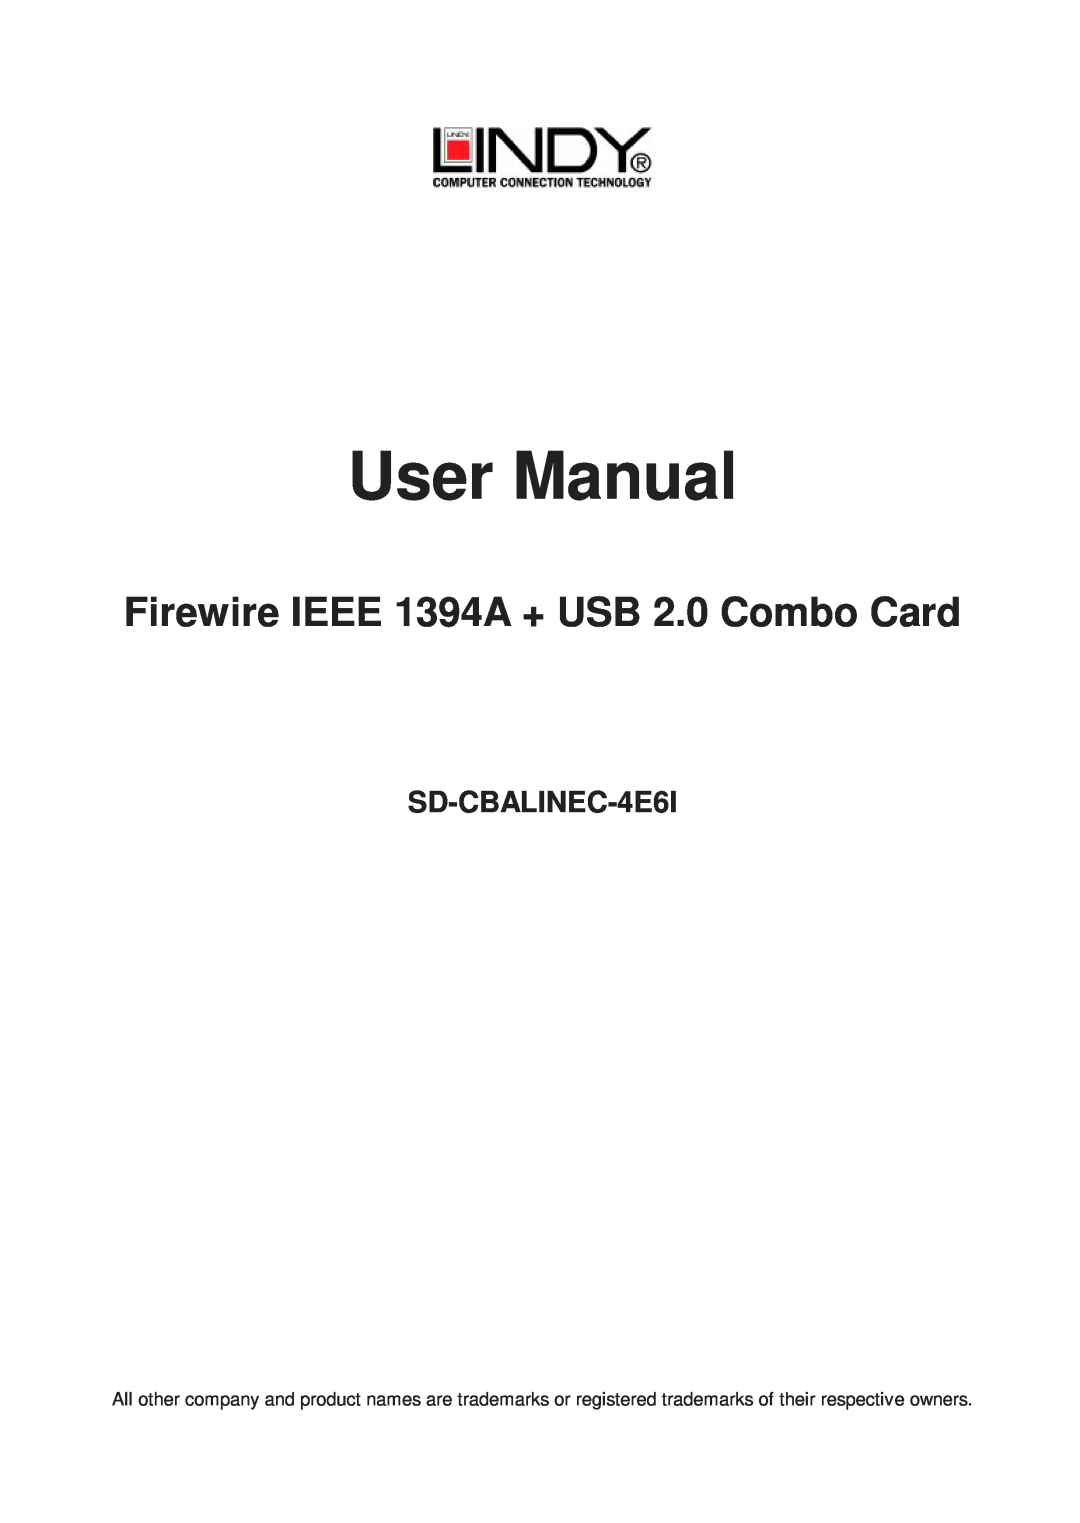 Lindy SD-CBALINEC-4E6I user manual User Manual, Firewire IEEE 1394A + USB 2.0 Combo Card 